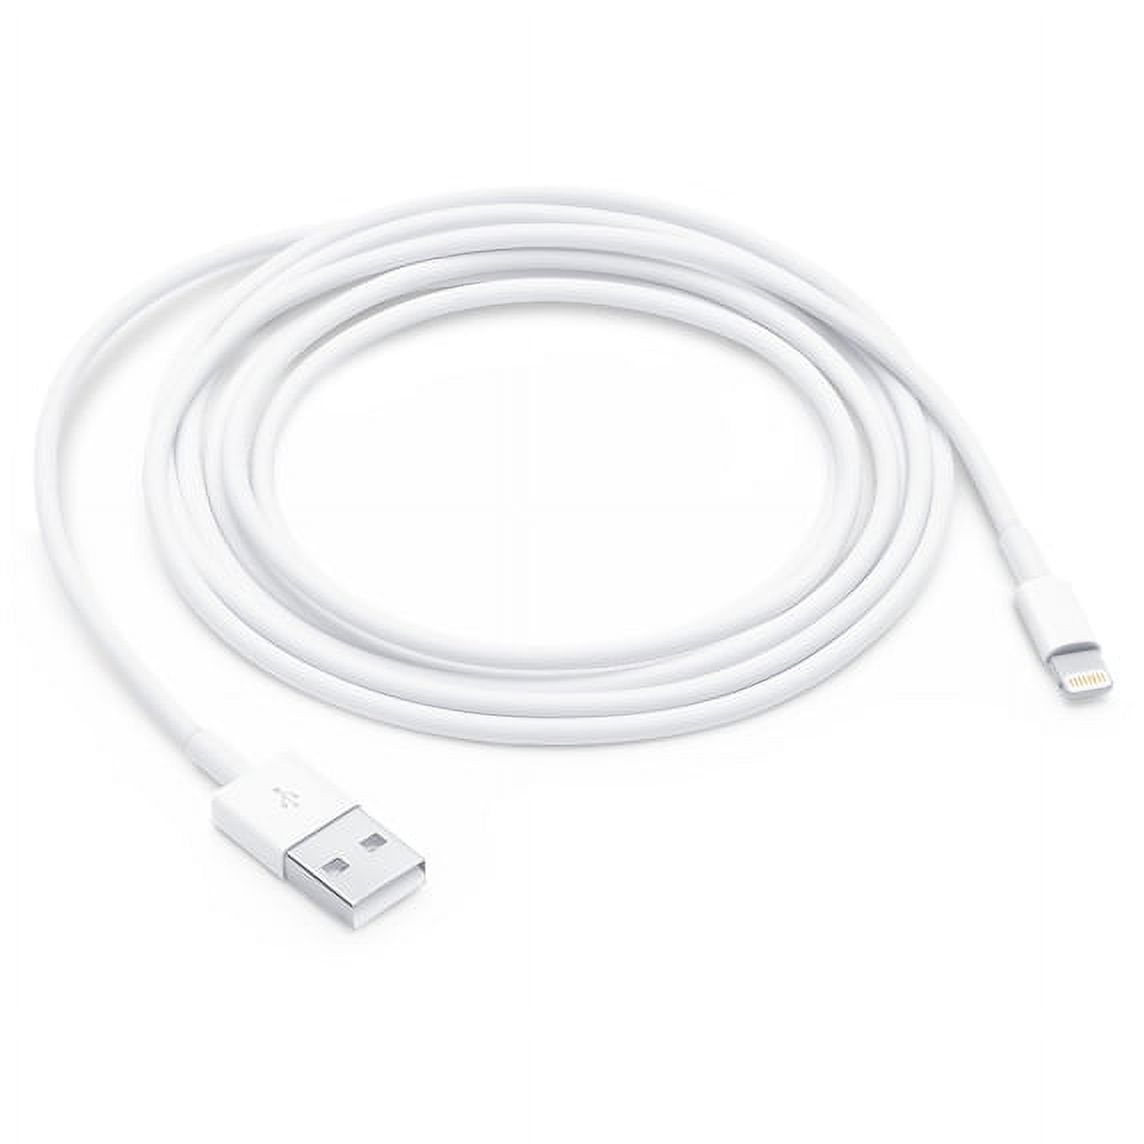 Apple USB-A to Lightning Cable for iPhone, iPad, Airpods, iPod - 6.6ft or 2m - image 1 of 4